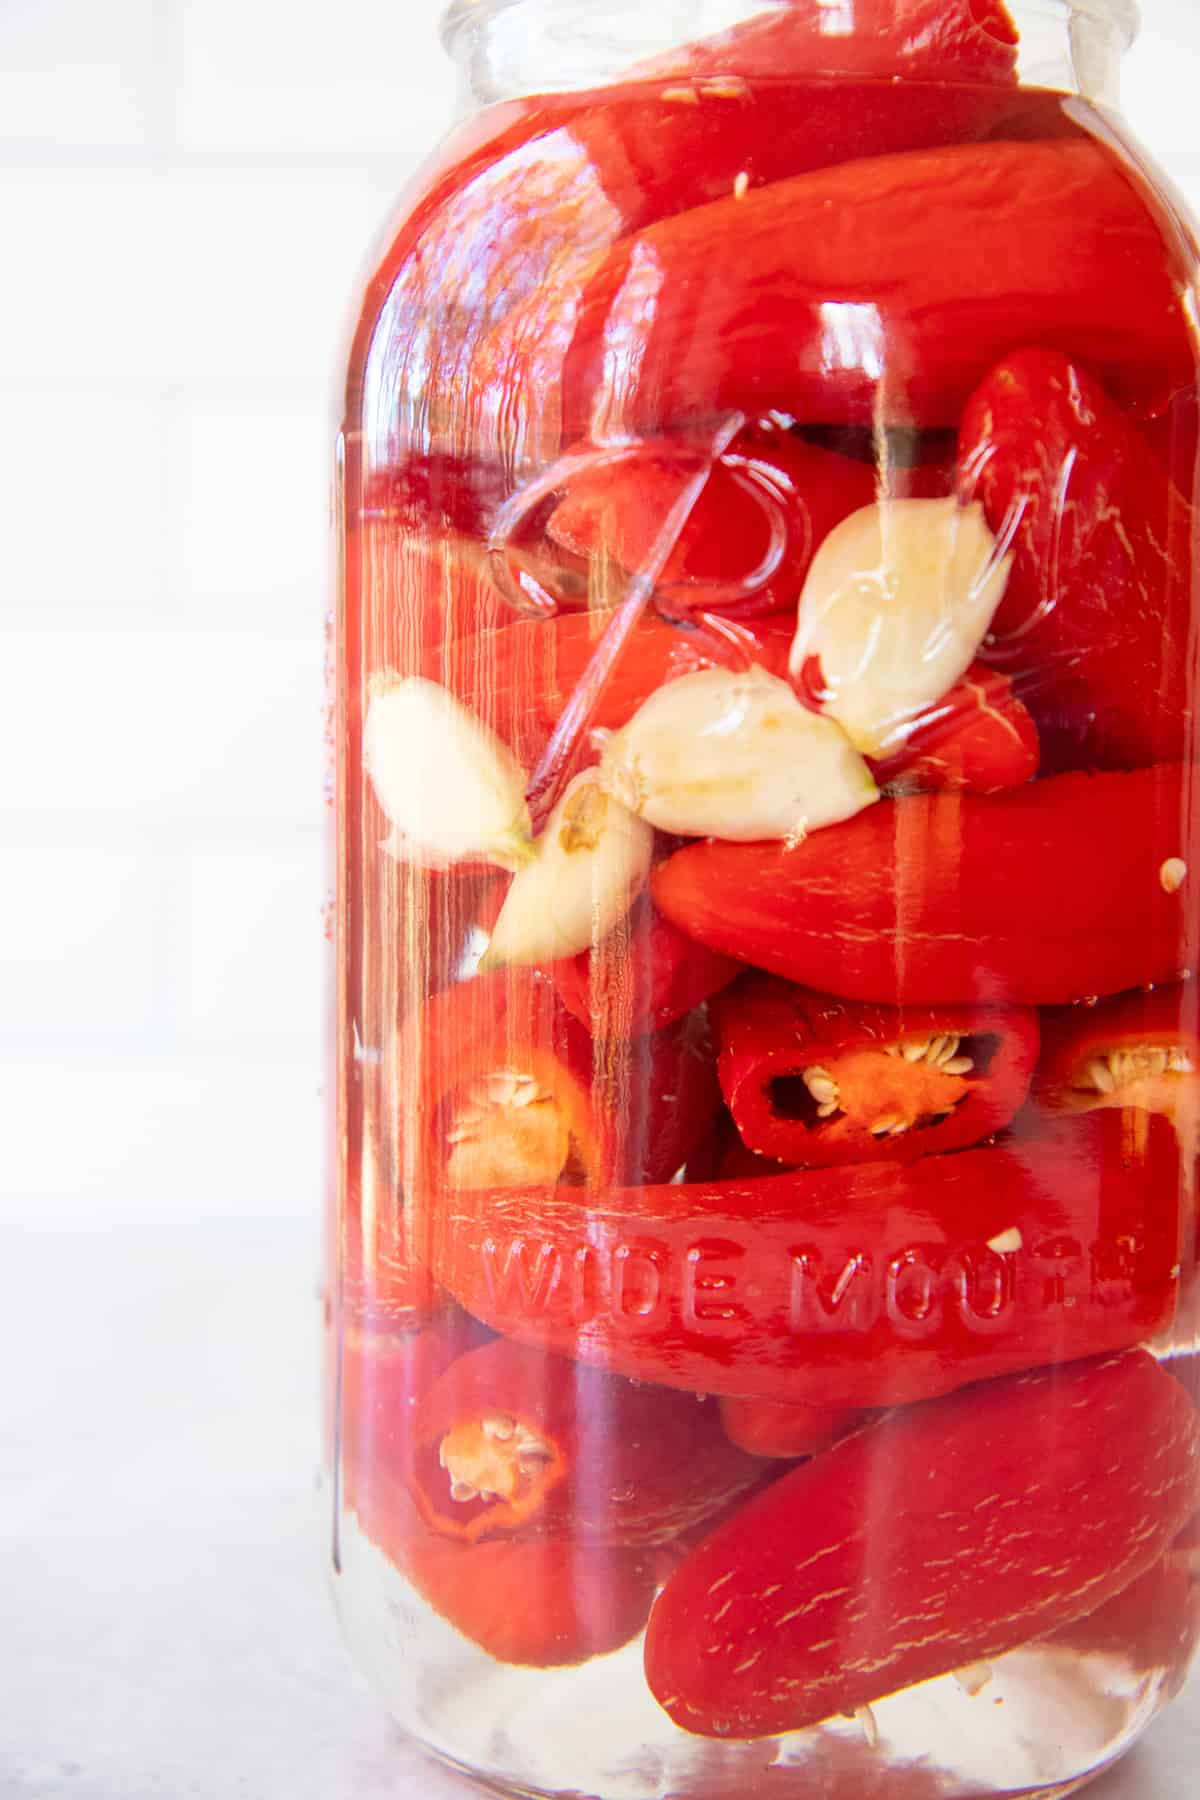 Close up of red peppers and garlic fermenting in a glass jar.